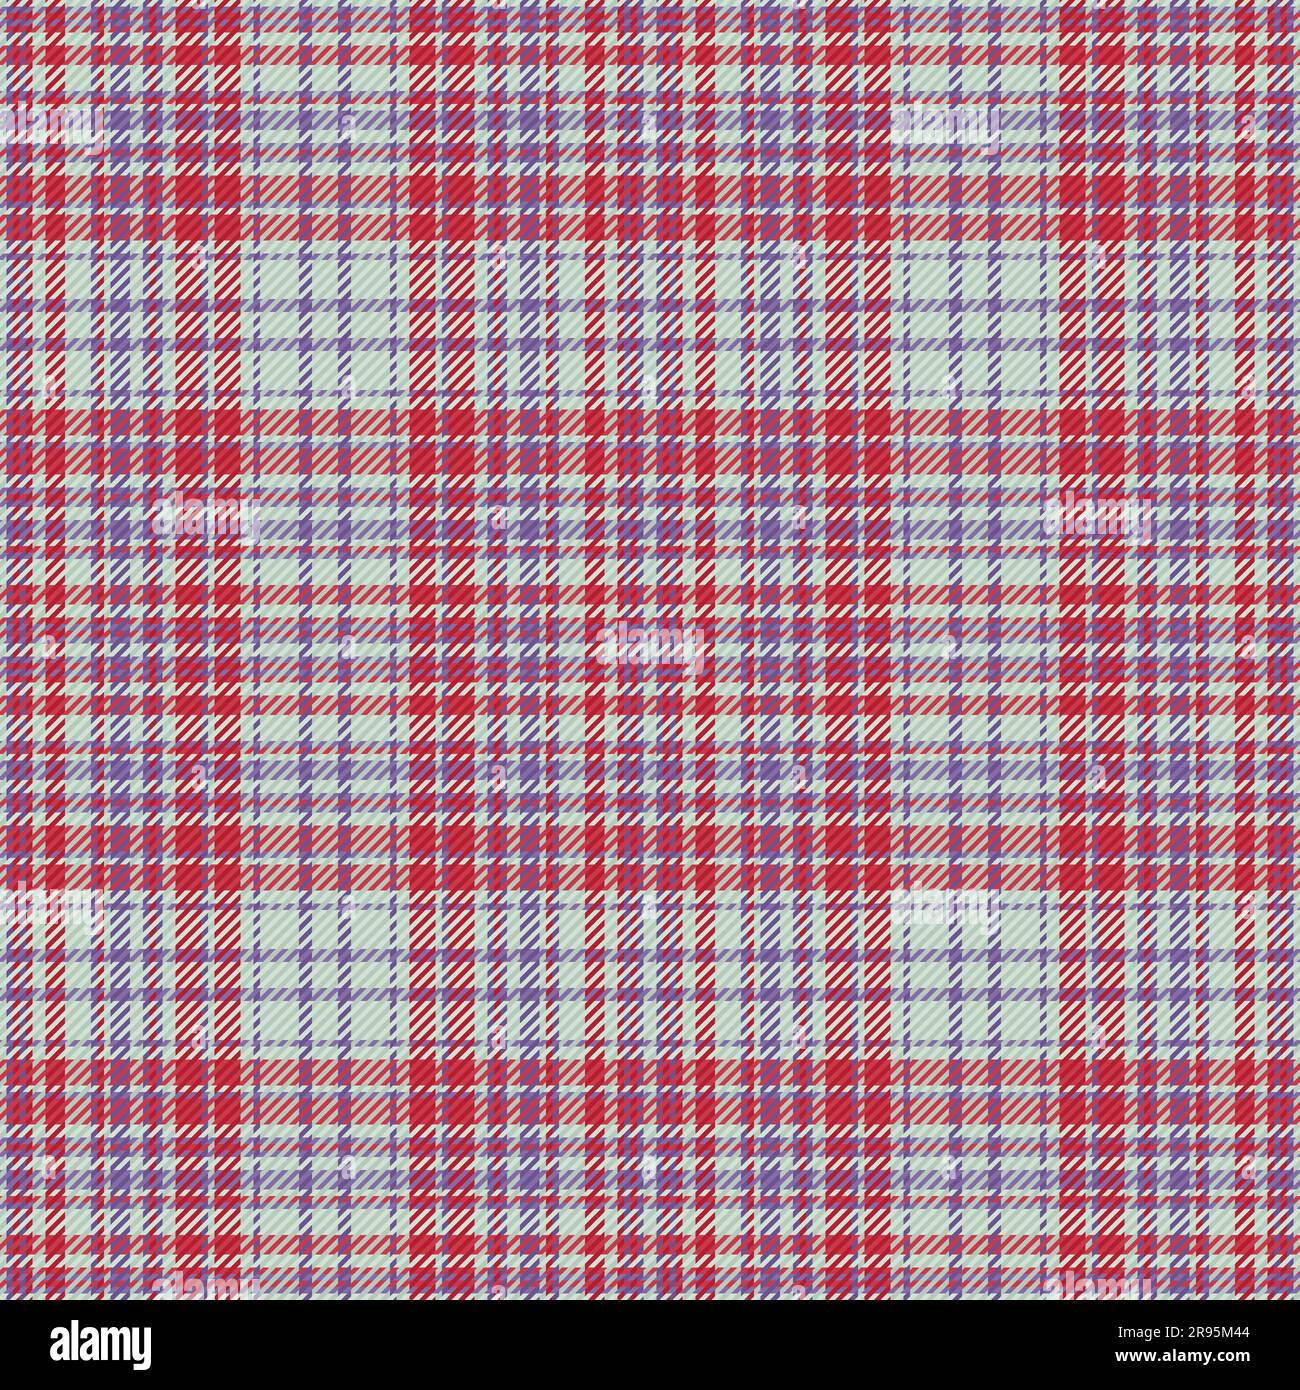 Tartan textile fabric of vector seamless background with a plaid pattern texture check in red and purple colors. Stock Vector